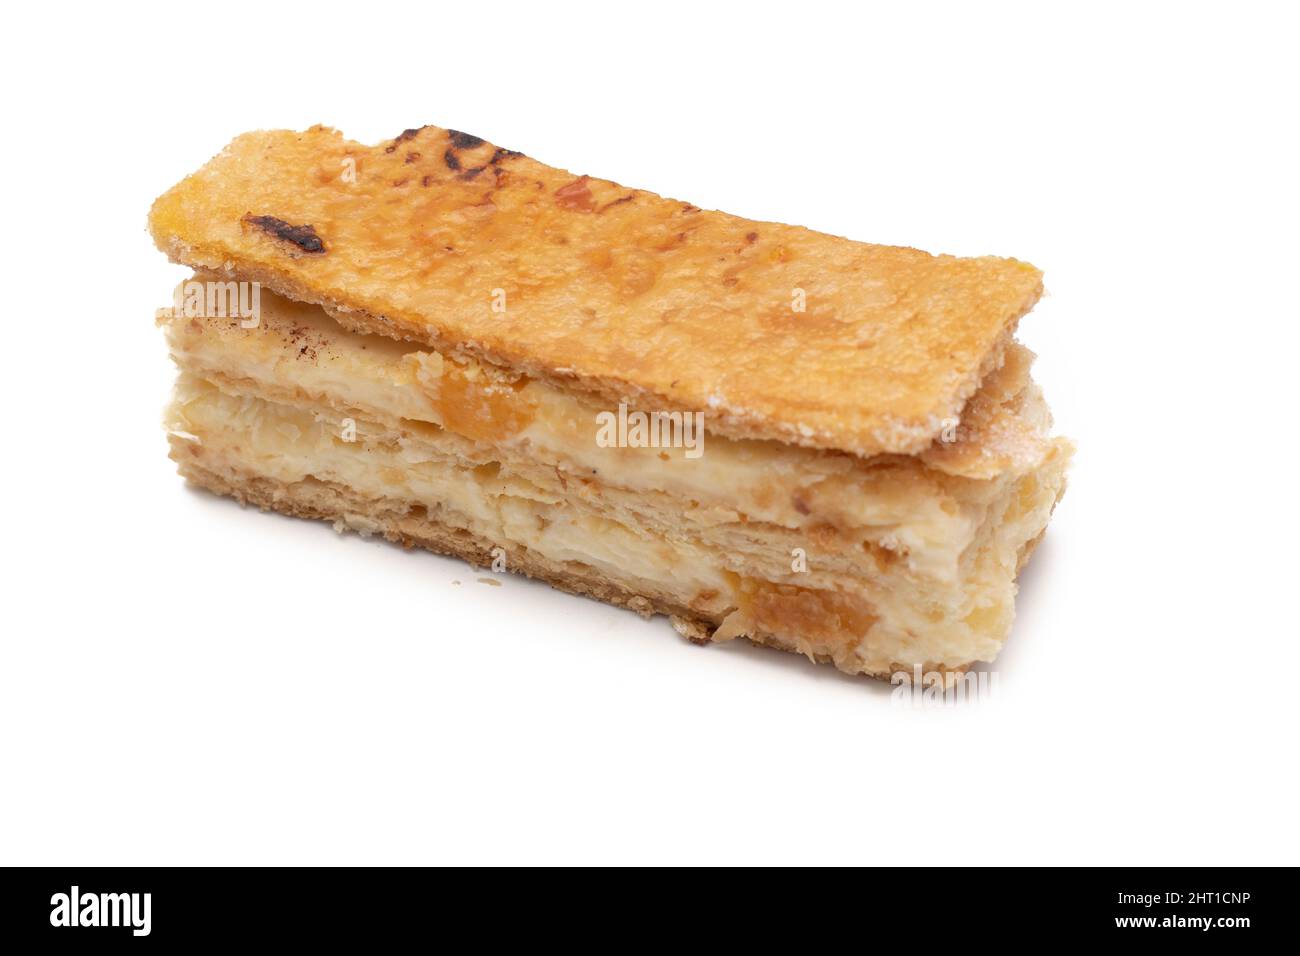 A delicious millefeuille piece of fruit. Isolated on white background. Stock Photo